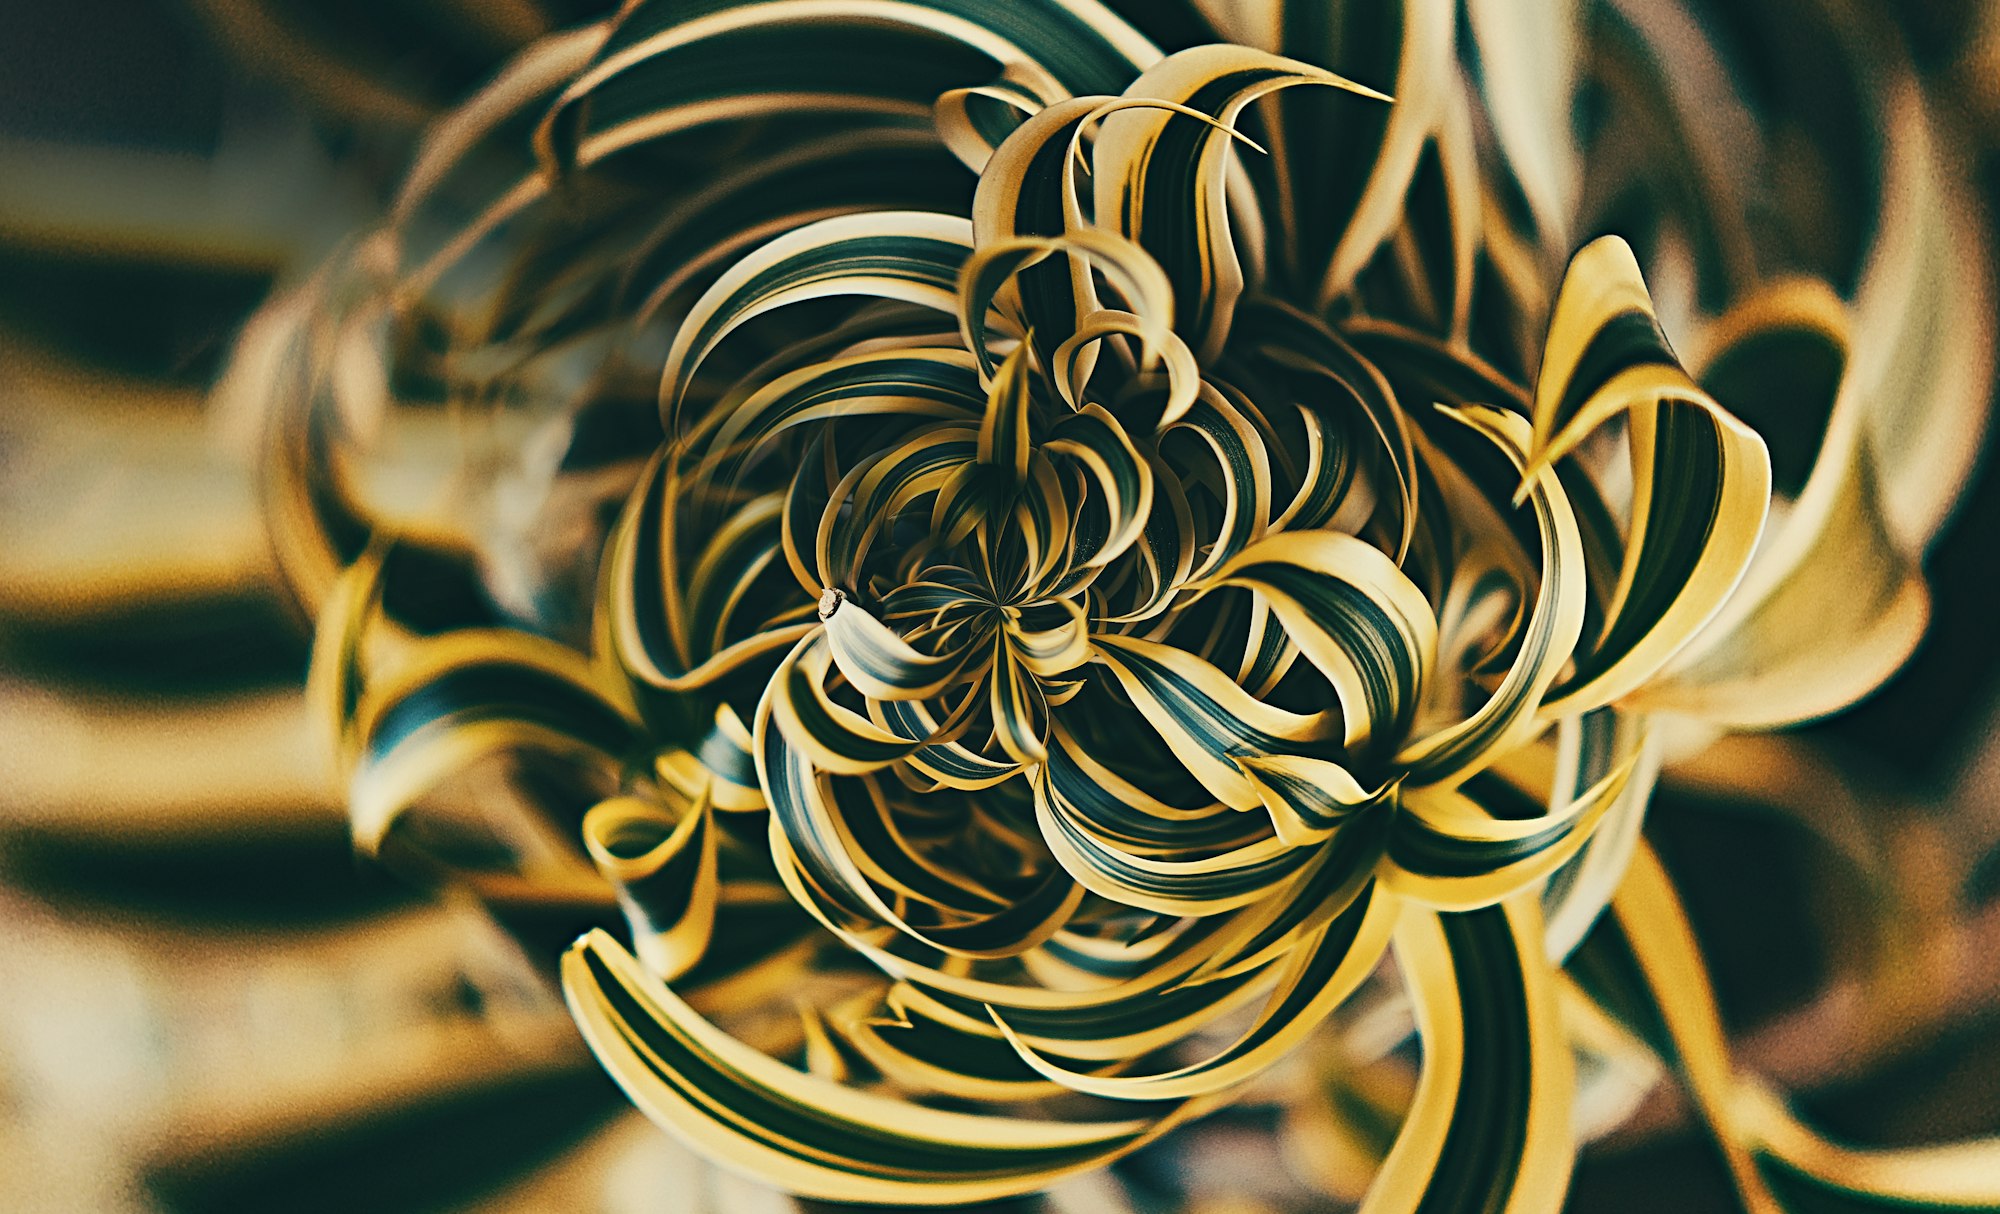 Dracaena reflexa (coined "song of Jamaica" or "song of India") swirled abstract.